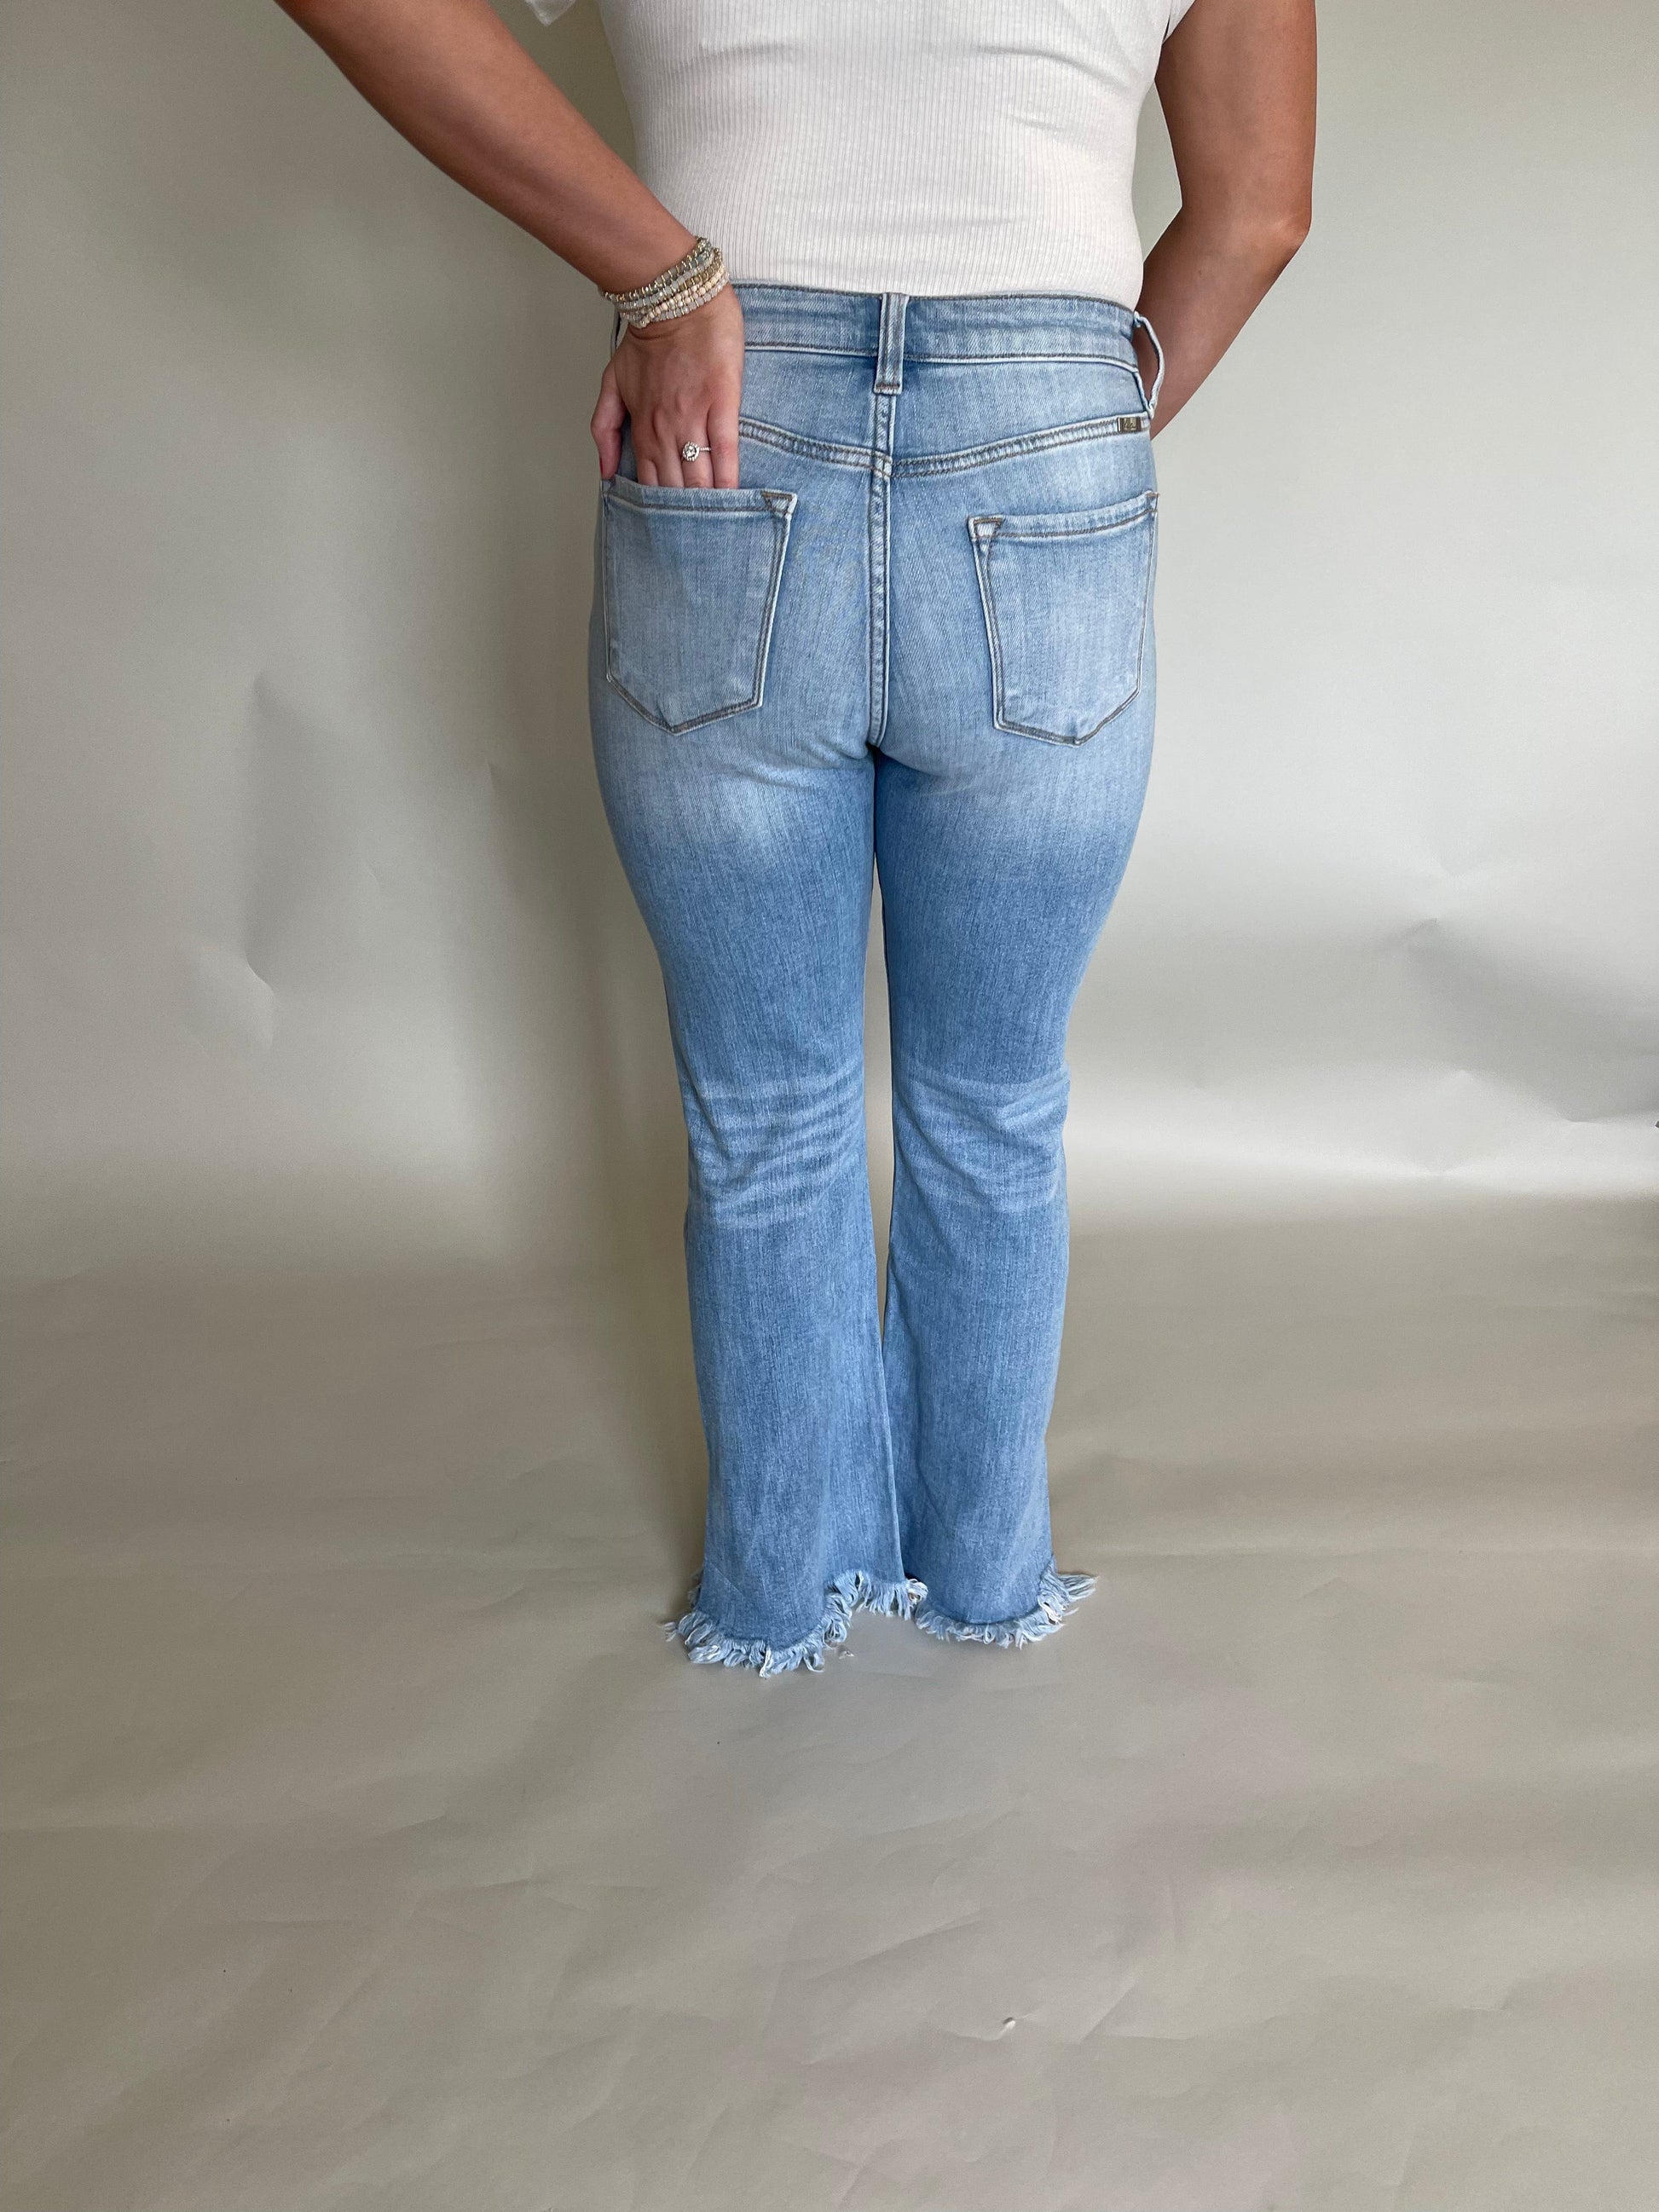 Yes I Kan Can Light Wash Frayed Denim Jeans – Made Mac